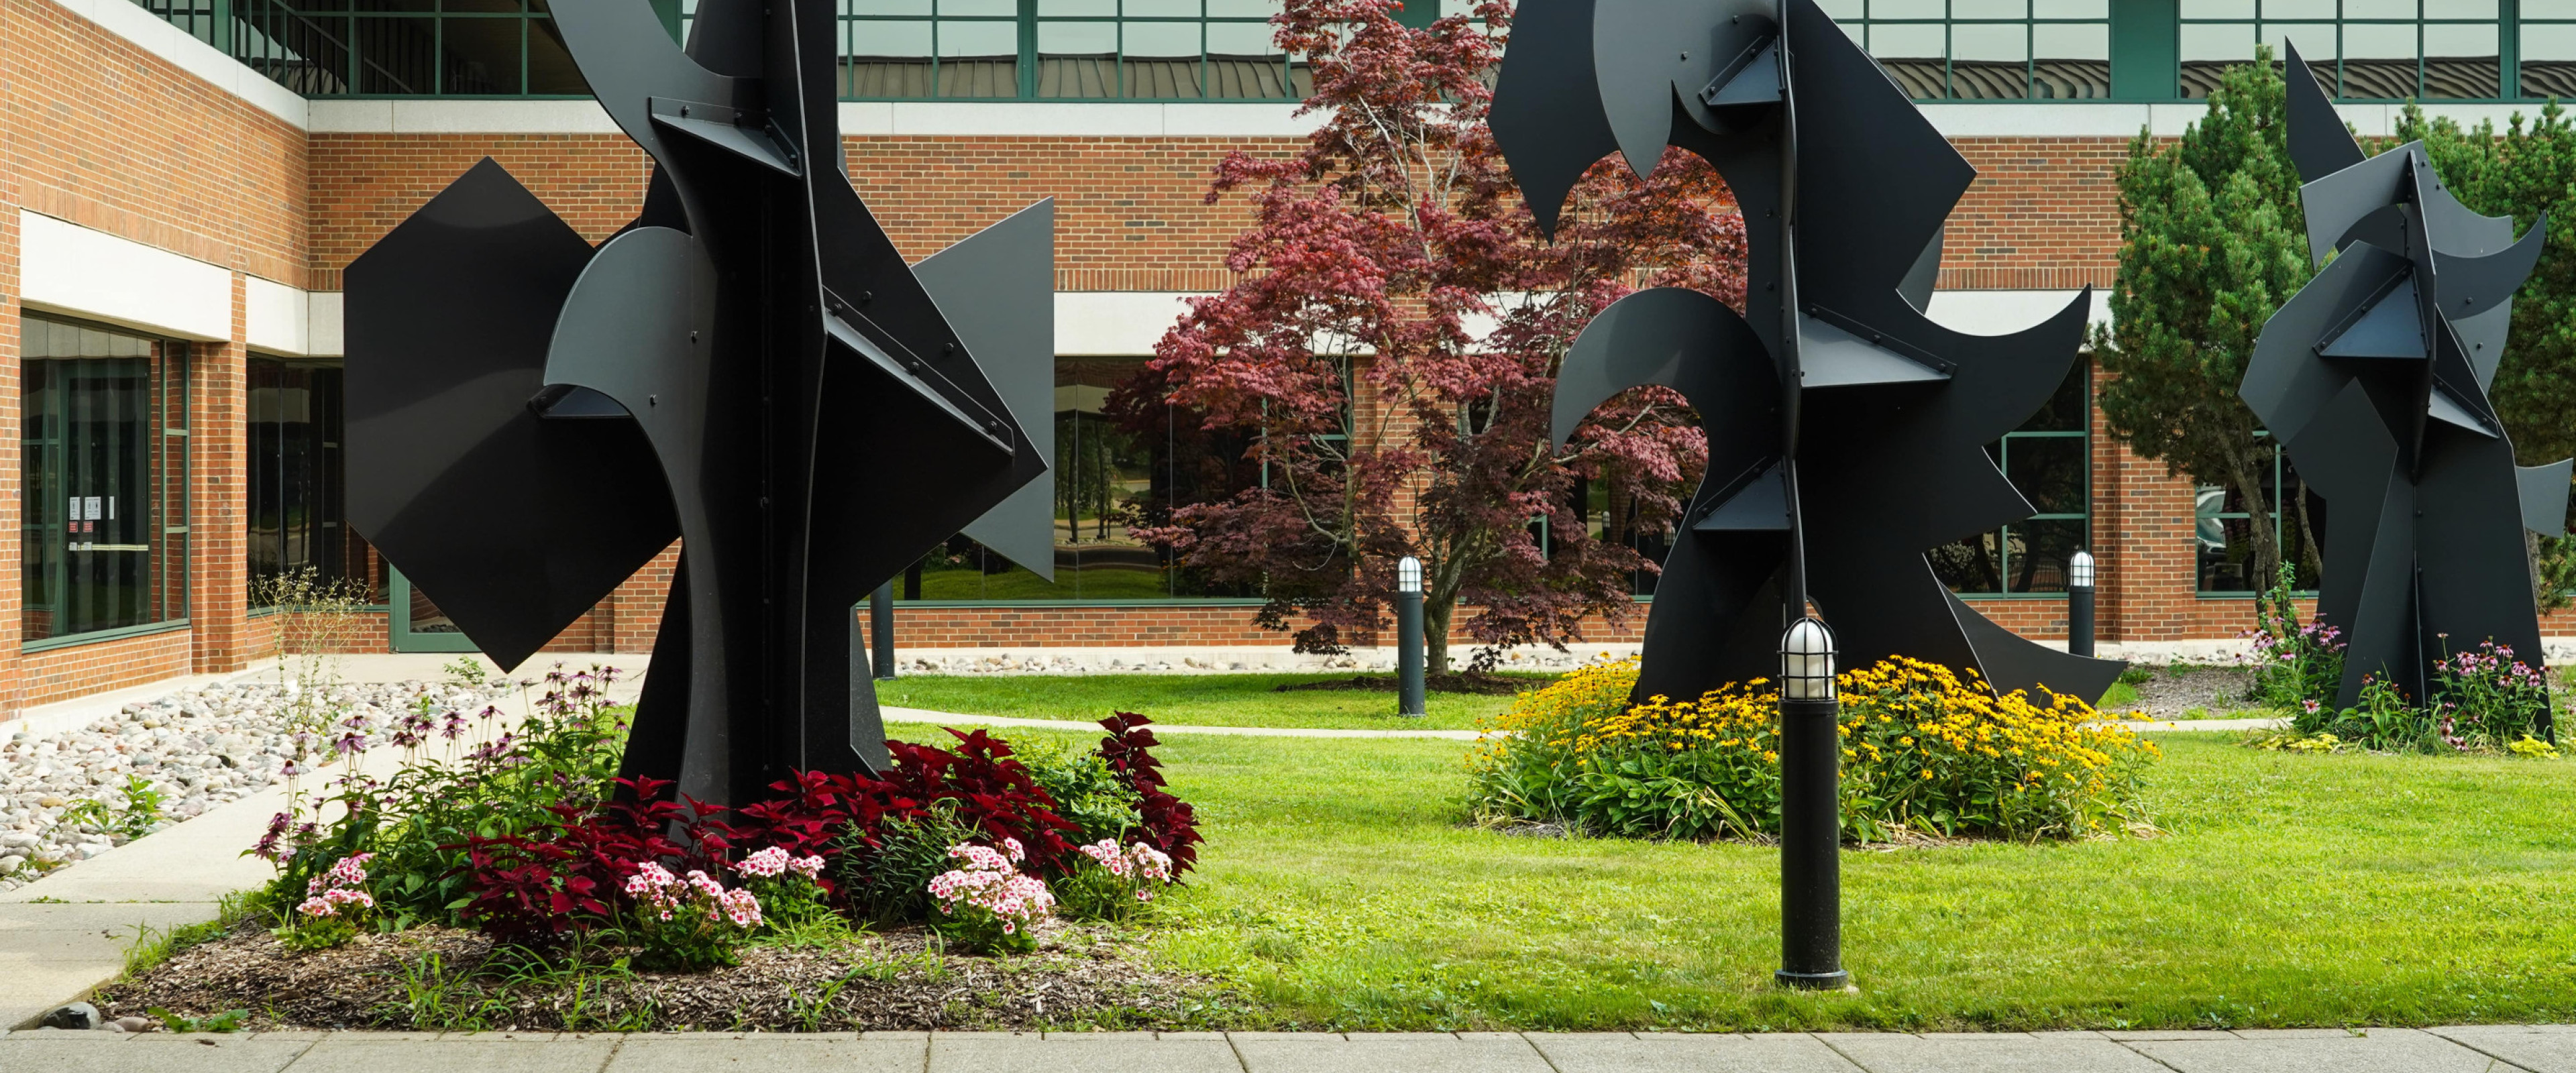 The Haworth College of Business courtyard has three large bronze abstract sculptures surrounded by flowers.